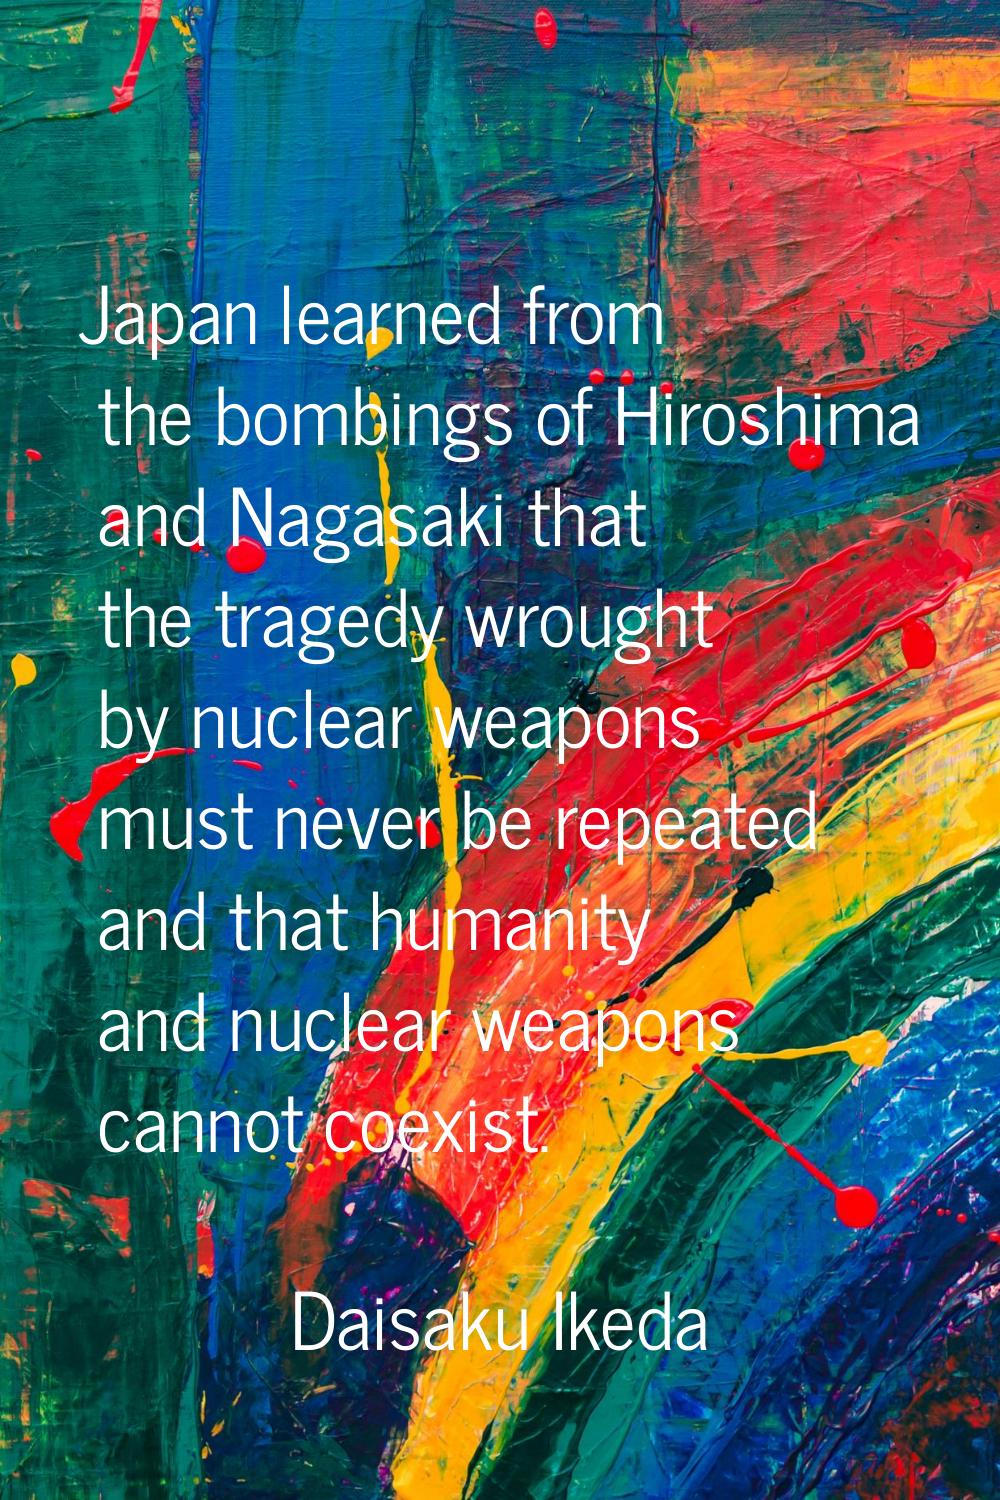 Japan learned from the bombings of Hiroshima and Nagasaki that the tragedy wrought by nuclear weapo